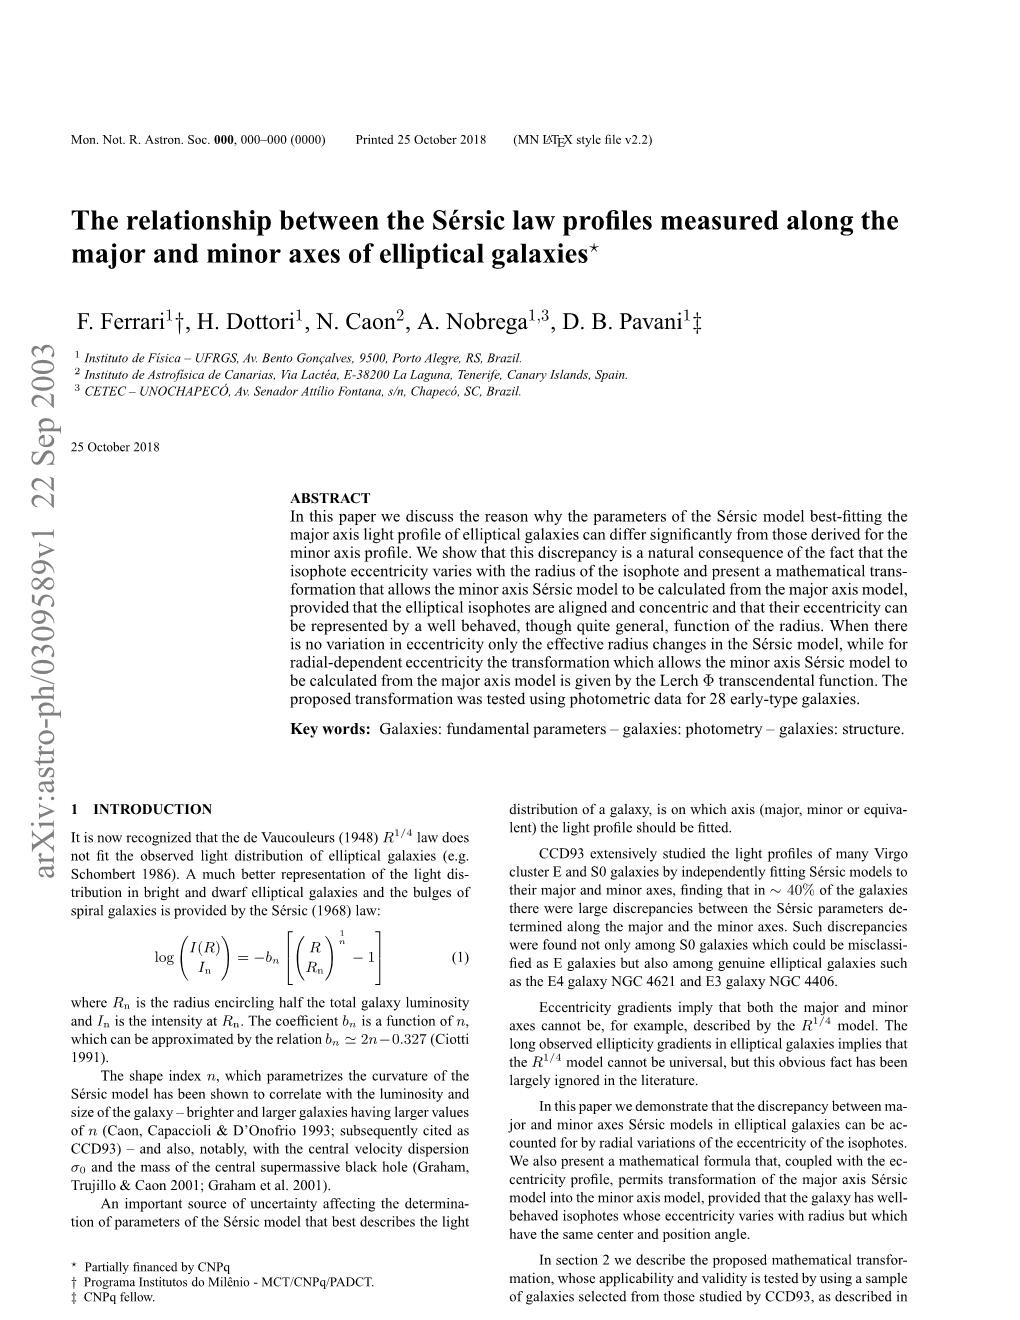 The Relationship Between the Sersic Law Profiles Measured Along The